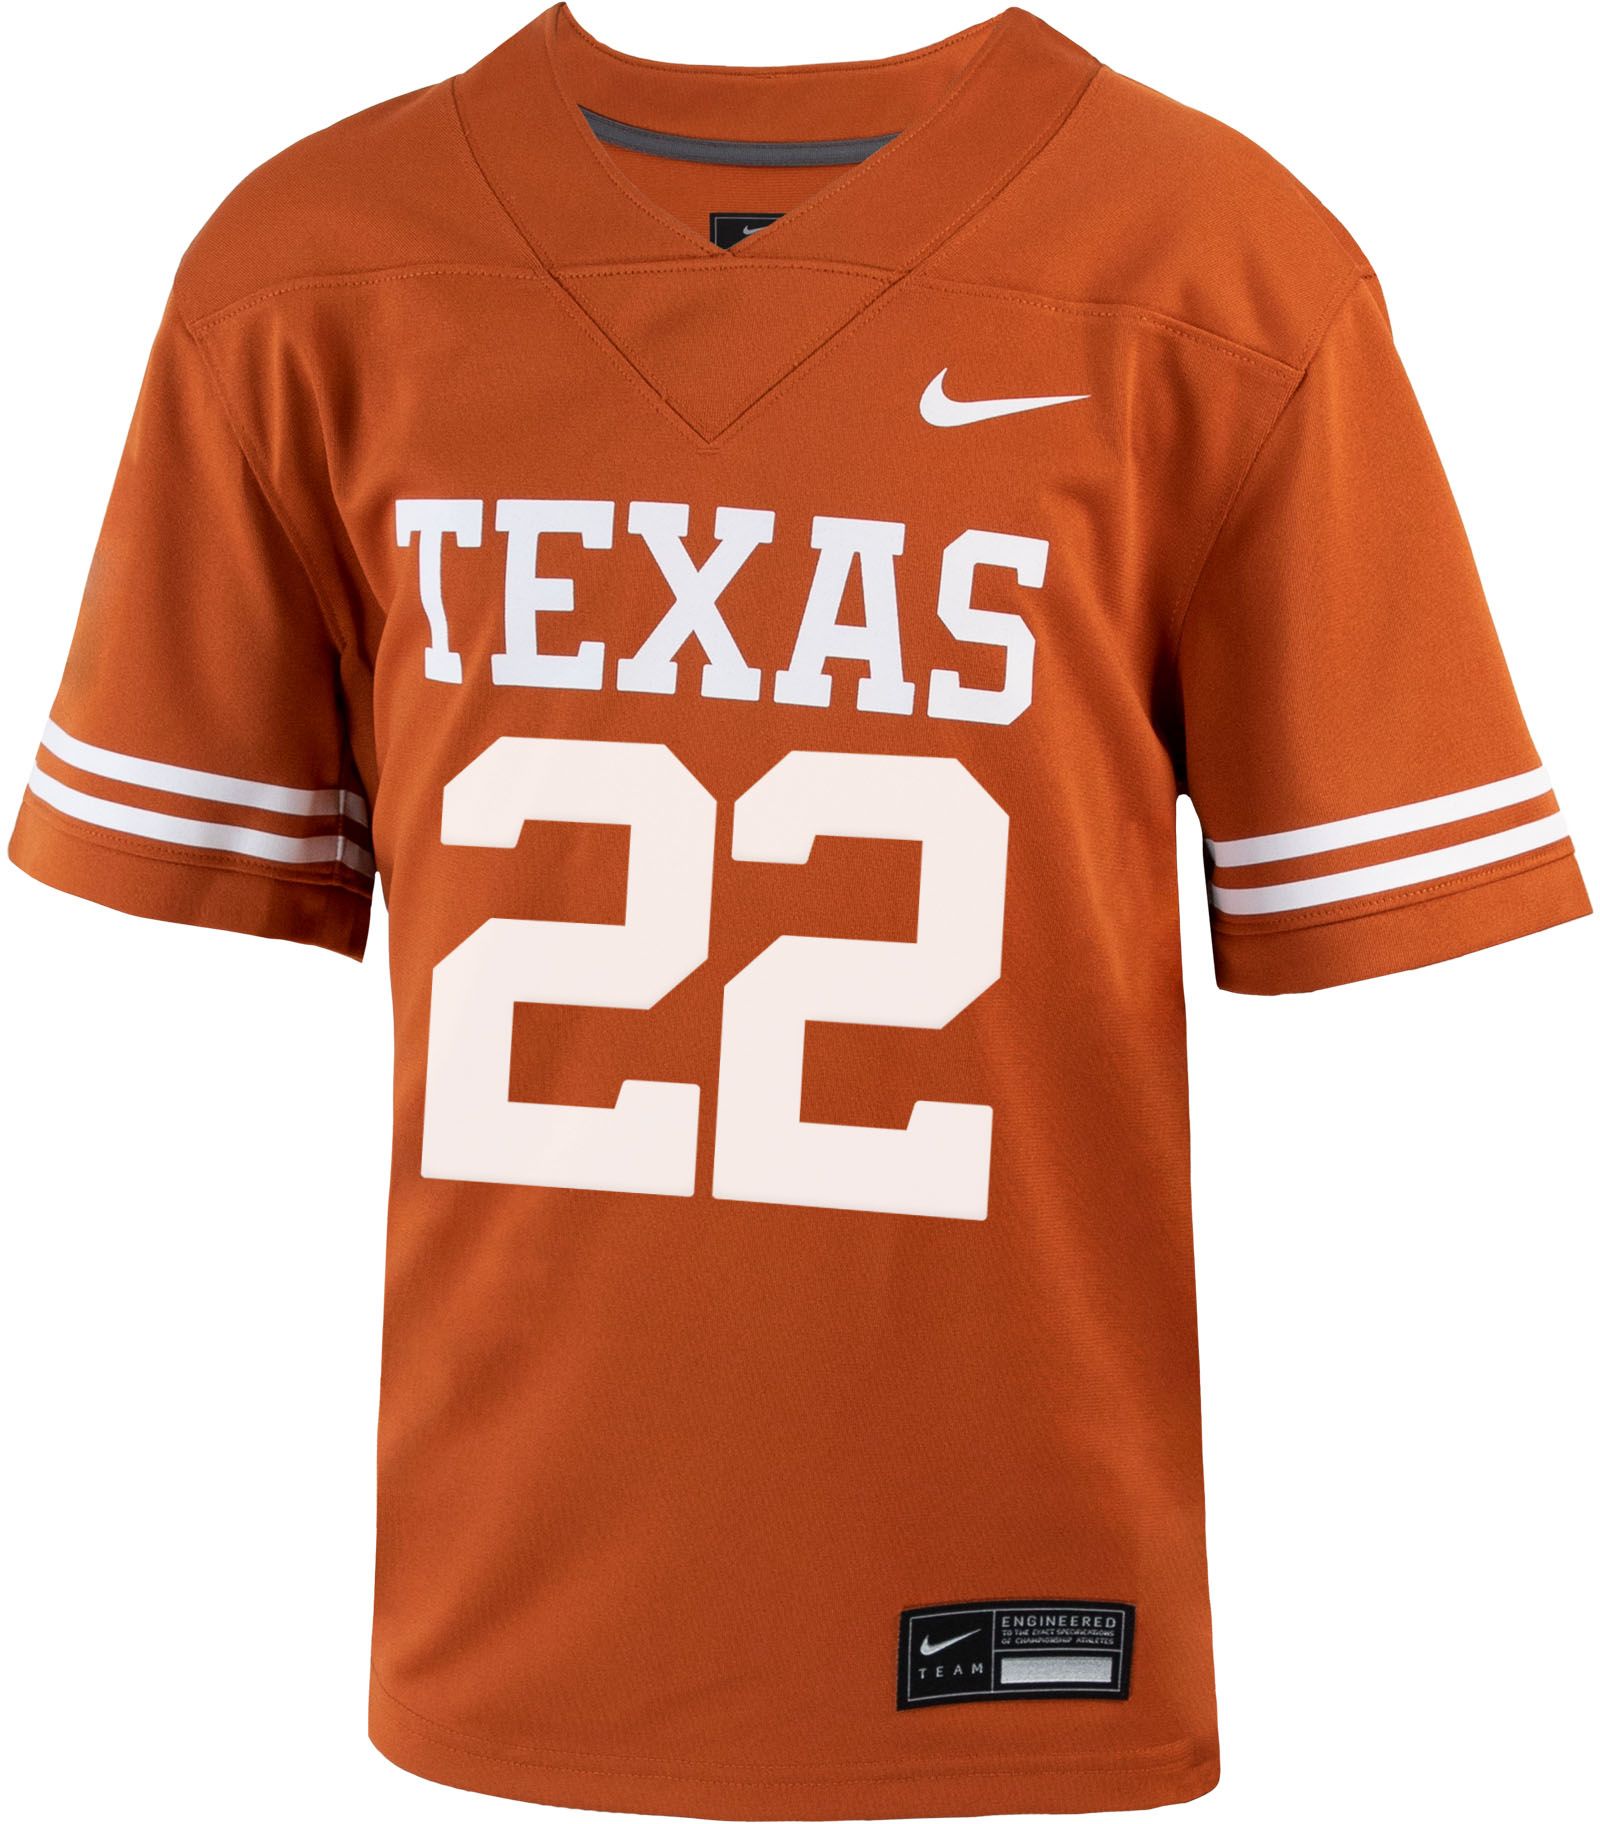 Longhorns youth jersey